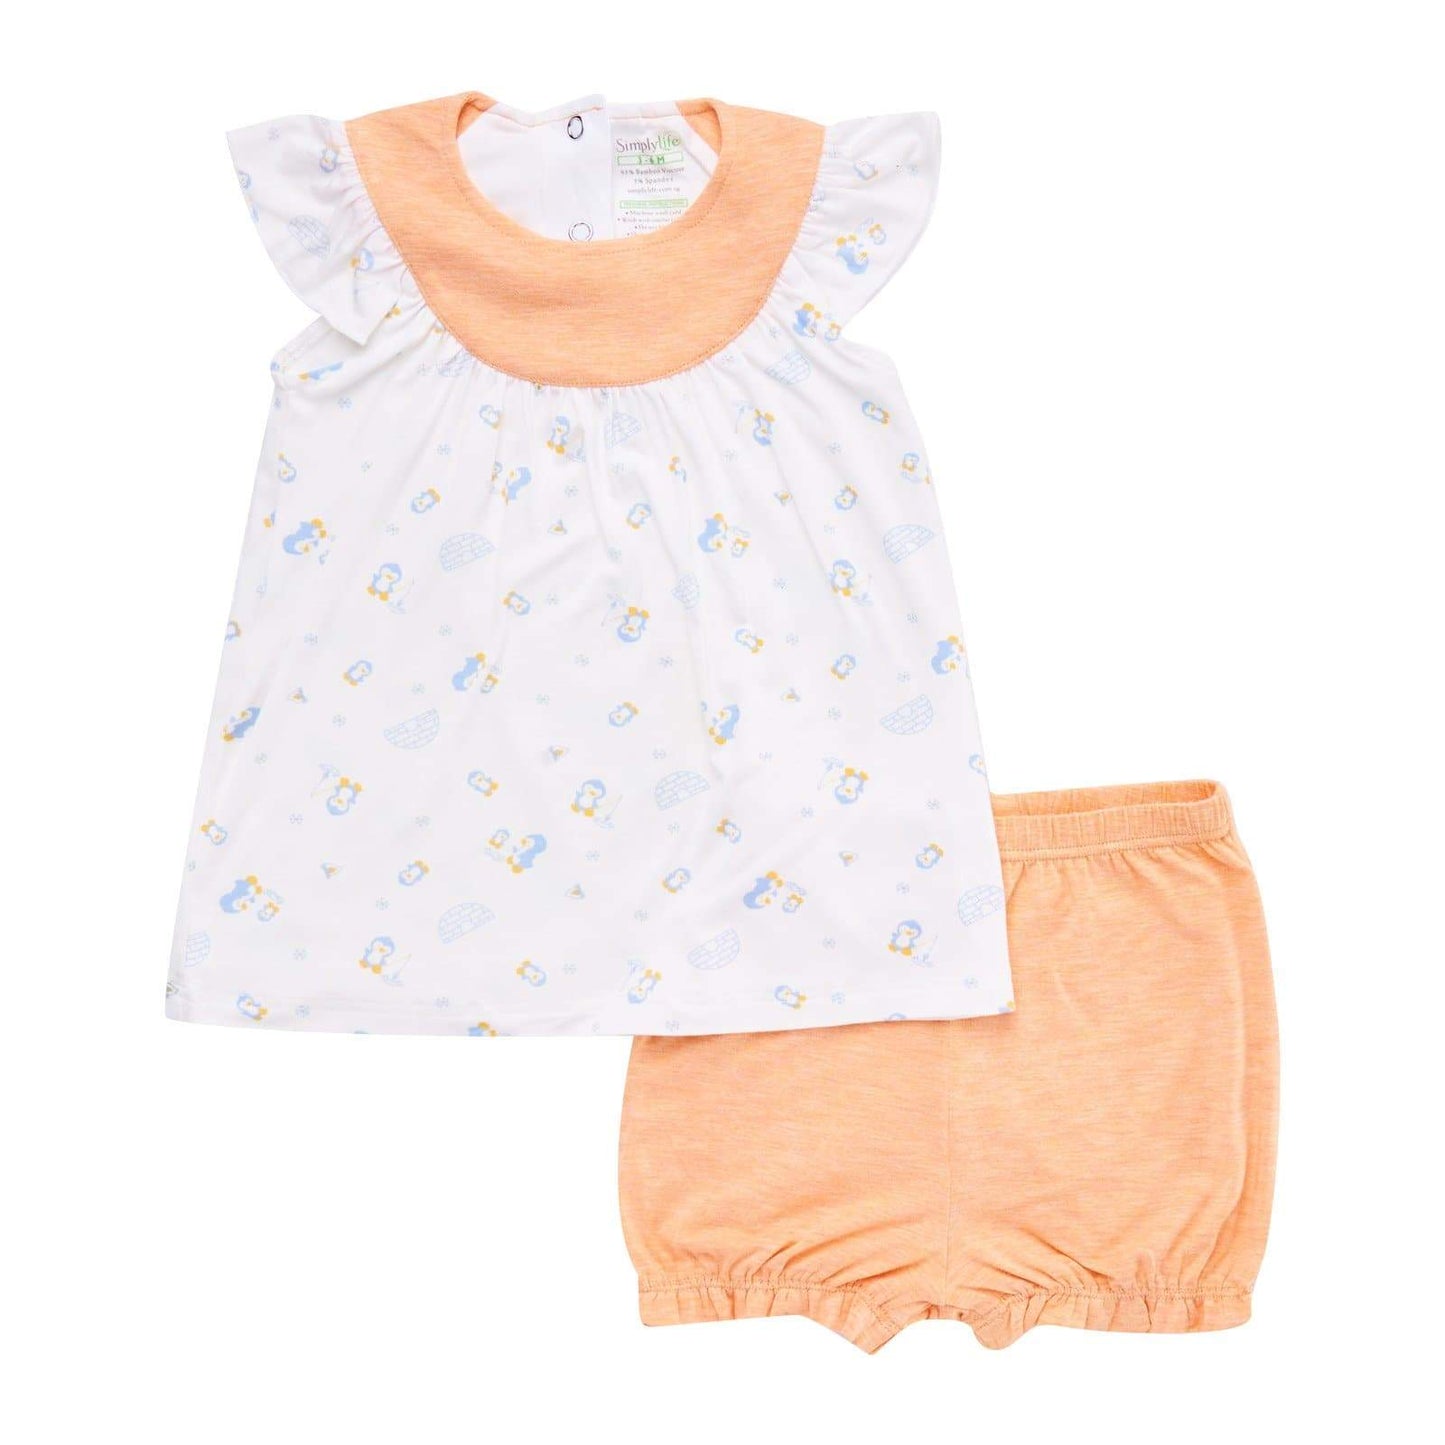 Penguins - Blouse with cap-sleeves & bloomer shorts (2pc Set) - Simply Life